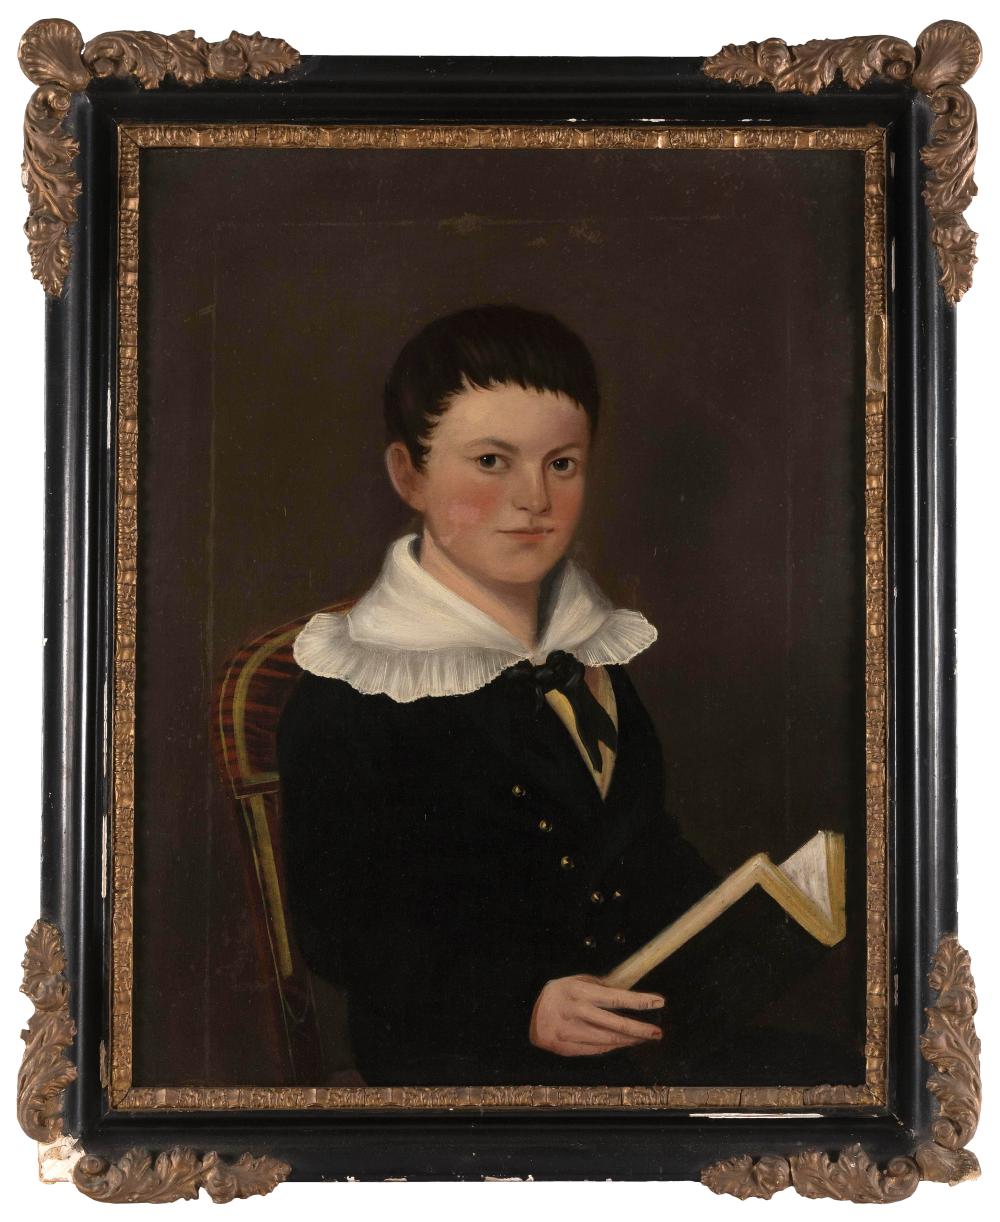 PORTRAIT OF A YOUNG BOY 19TH CENTURY 2f25ce